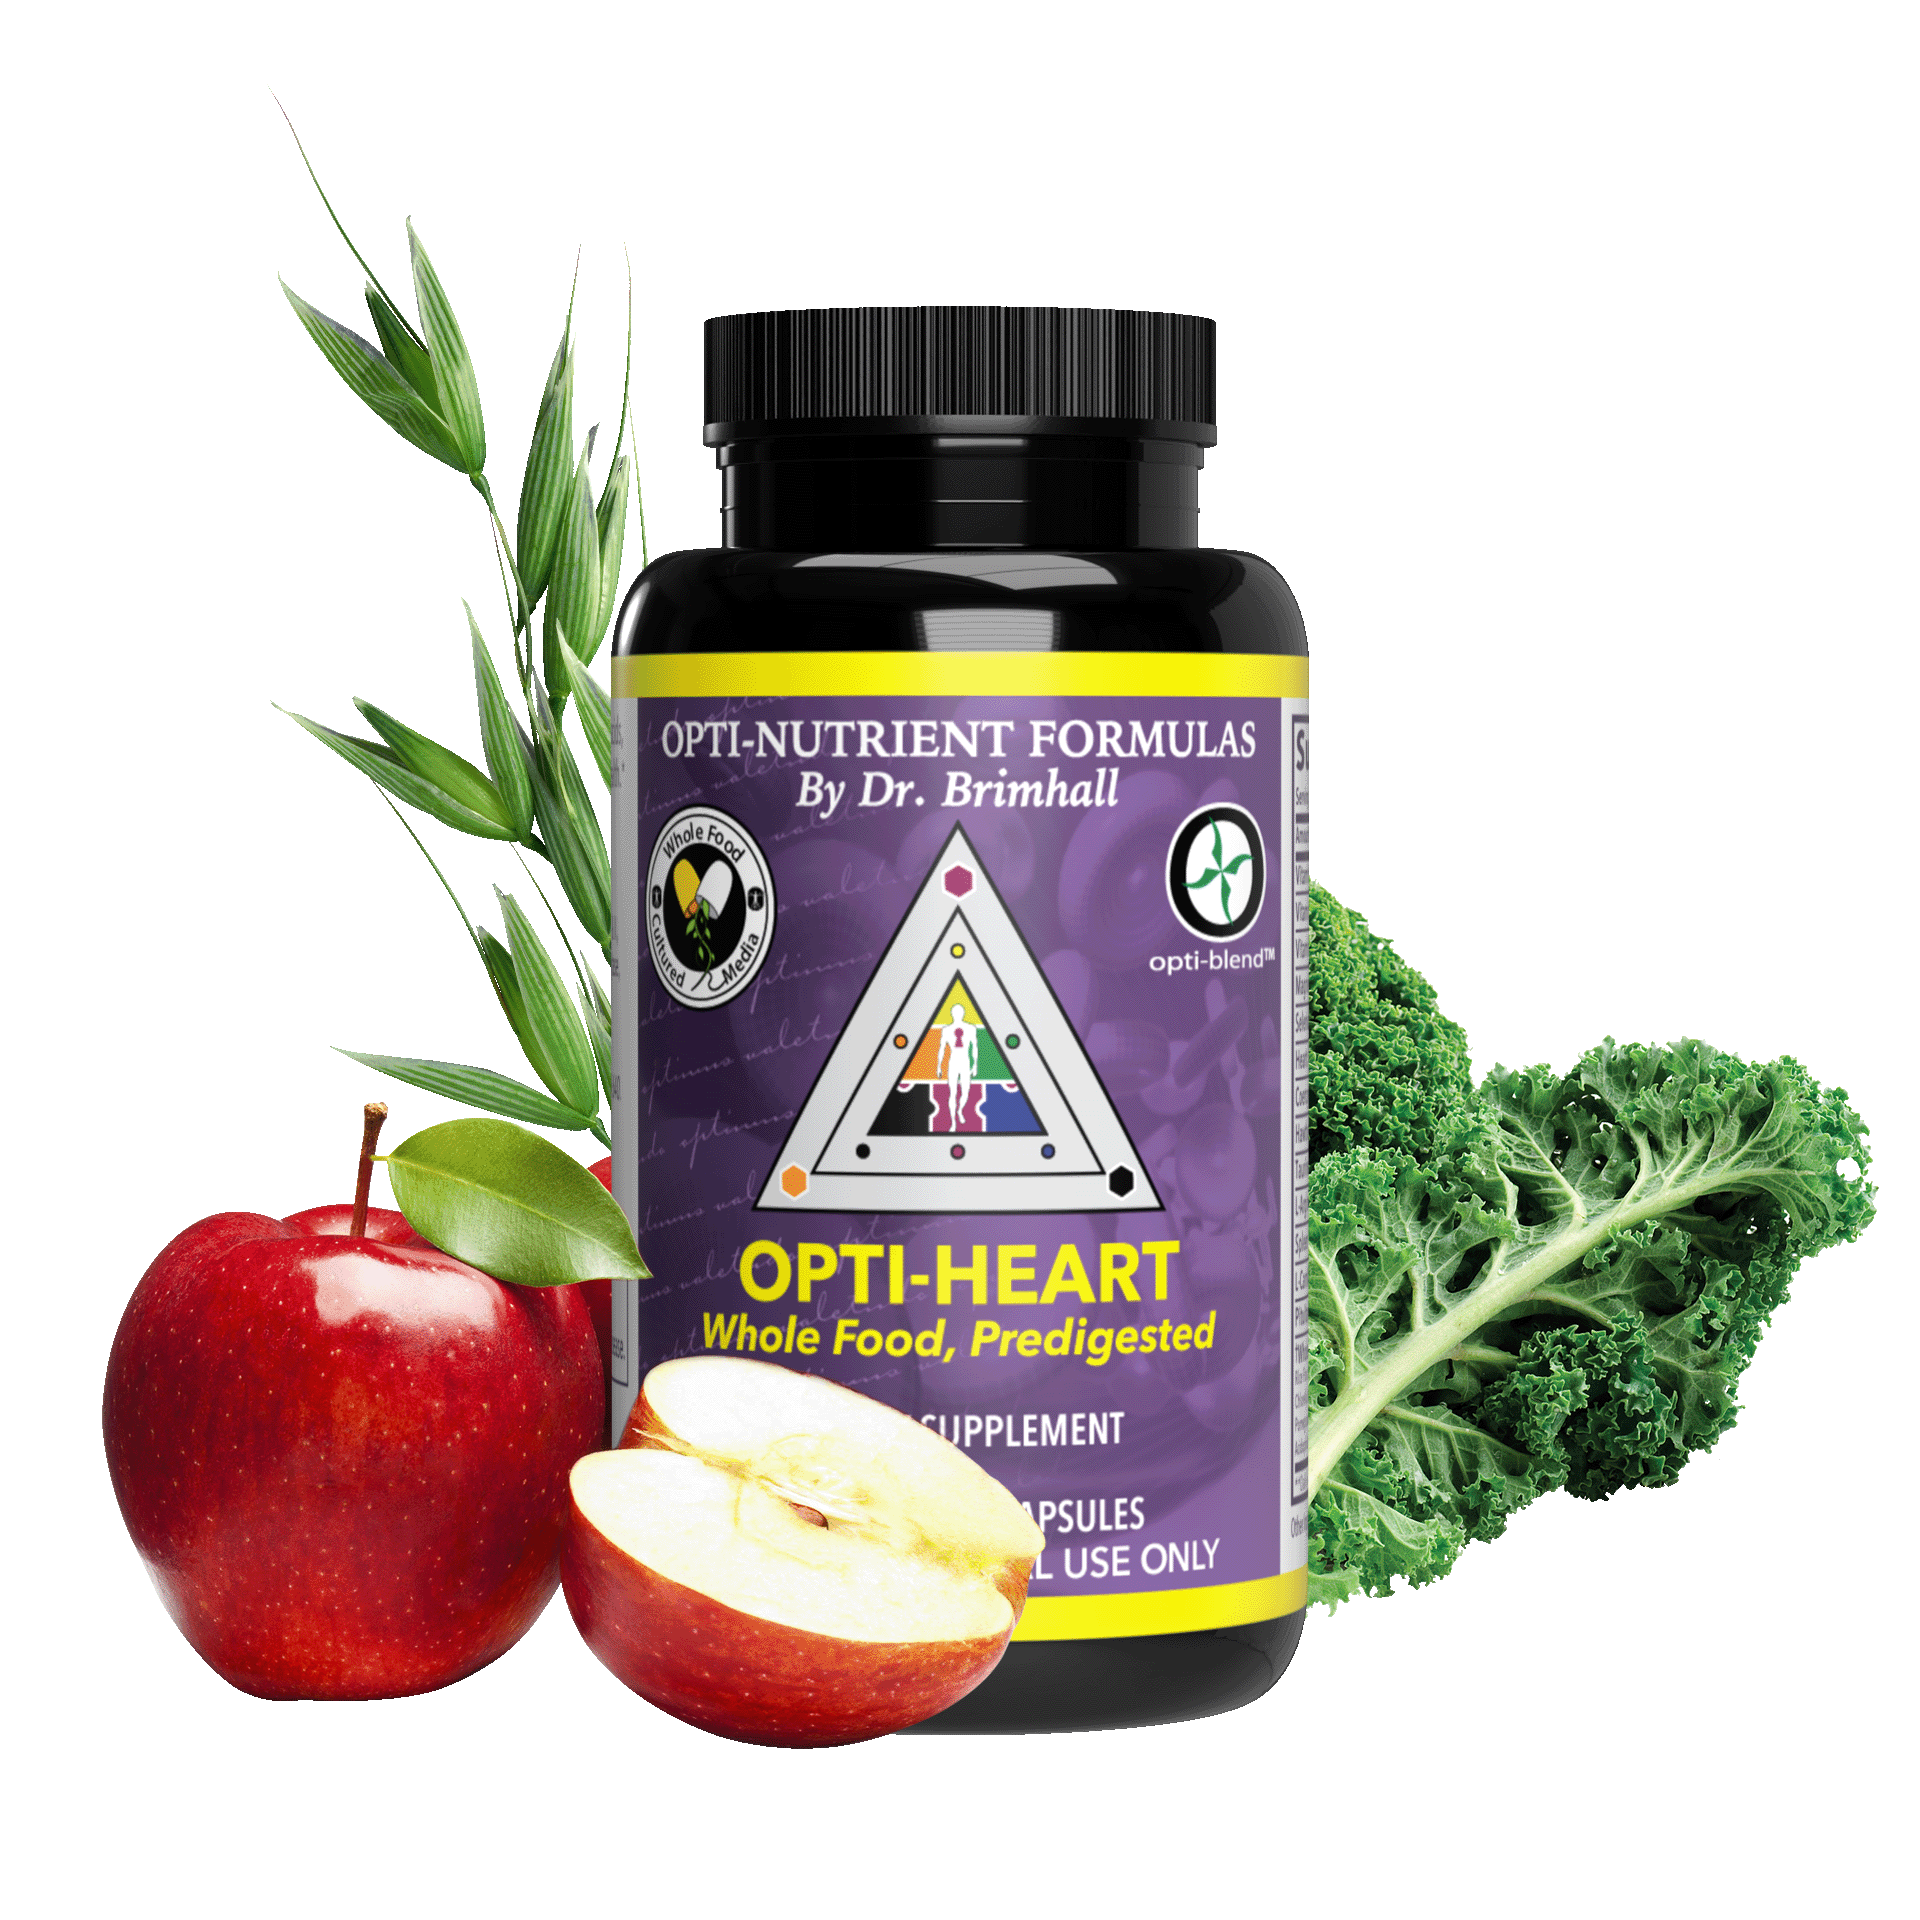 Image of a bottle of Opti-Nutrients Opti-Heart. around the bottle is kale, apples, and barley grass.